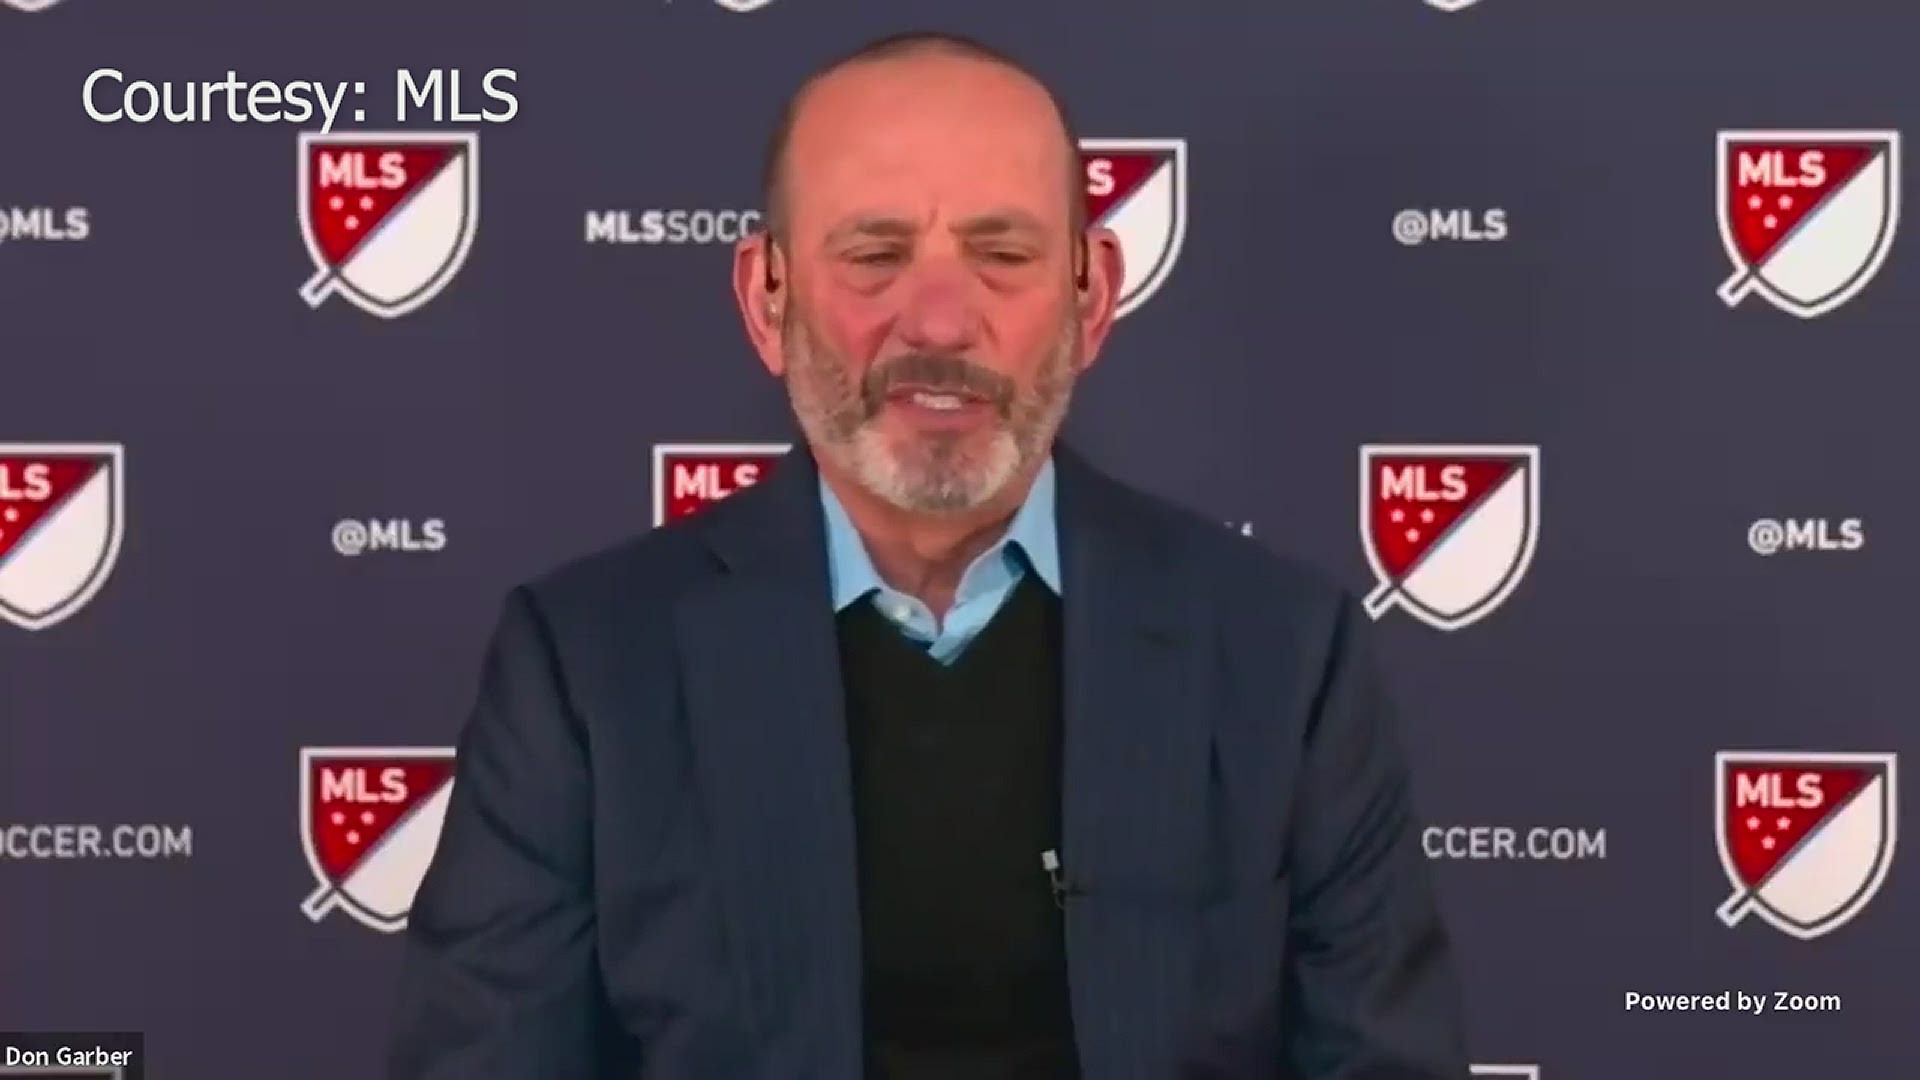 MLS commissioner Don Garber gave a glowing review of Austin and Austin FC after his visit to Q2 Stadium.